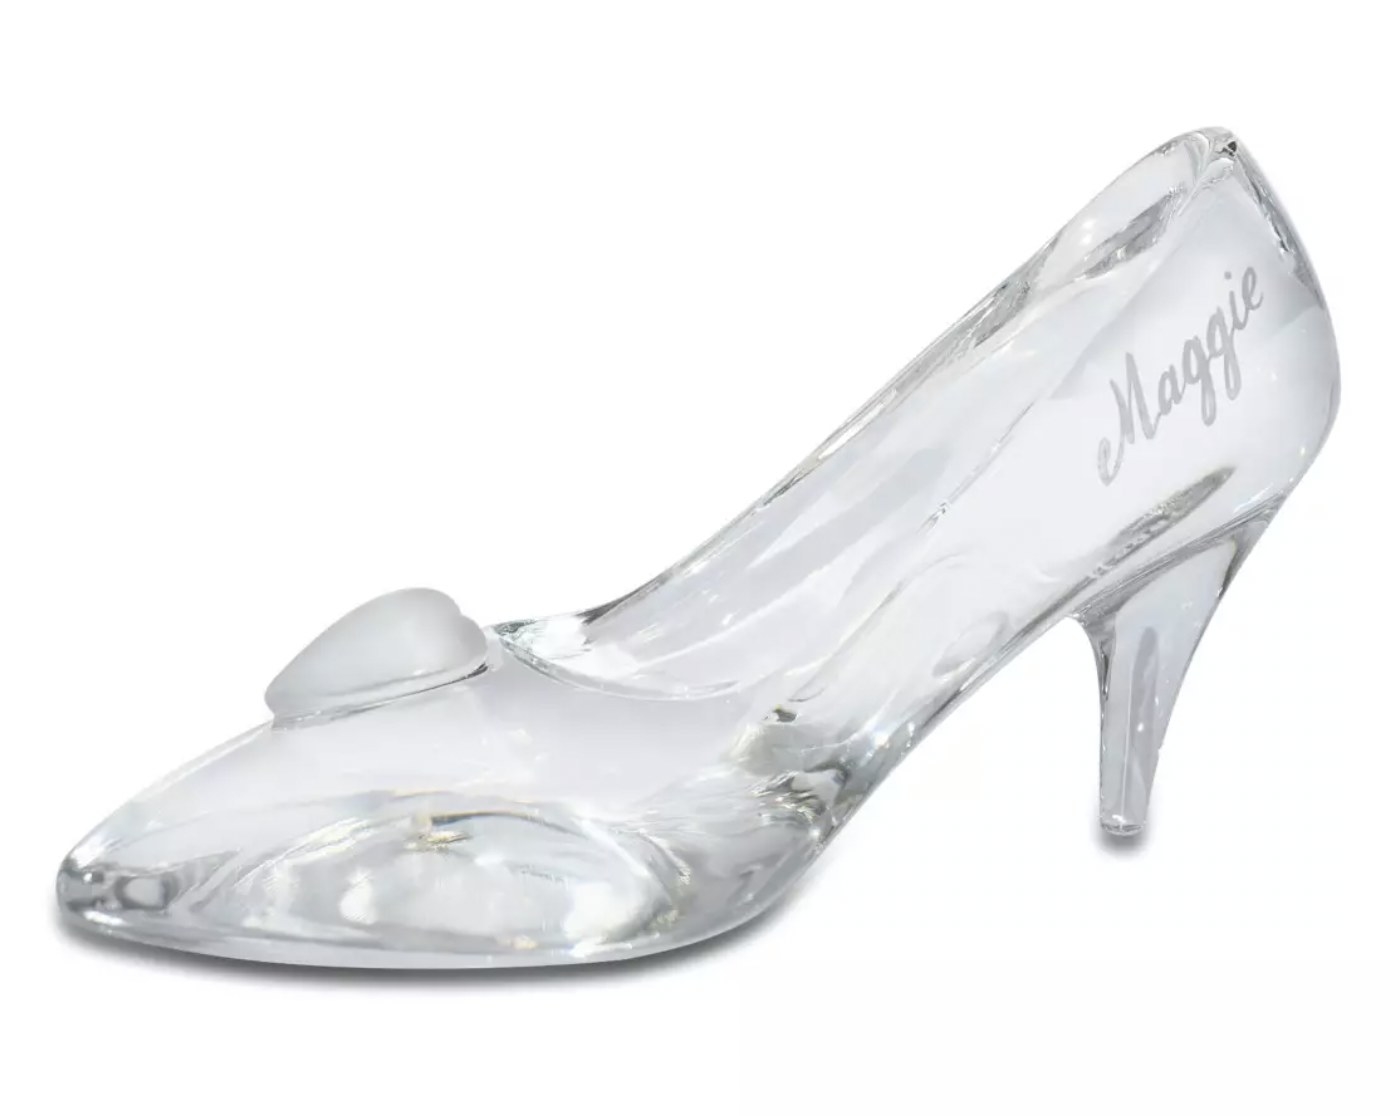 the glass slipper with name Maggie engraved in cursive